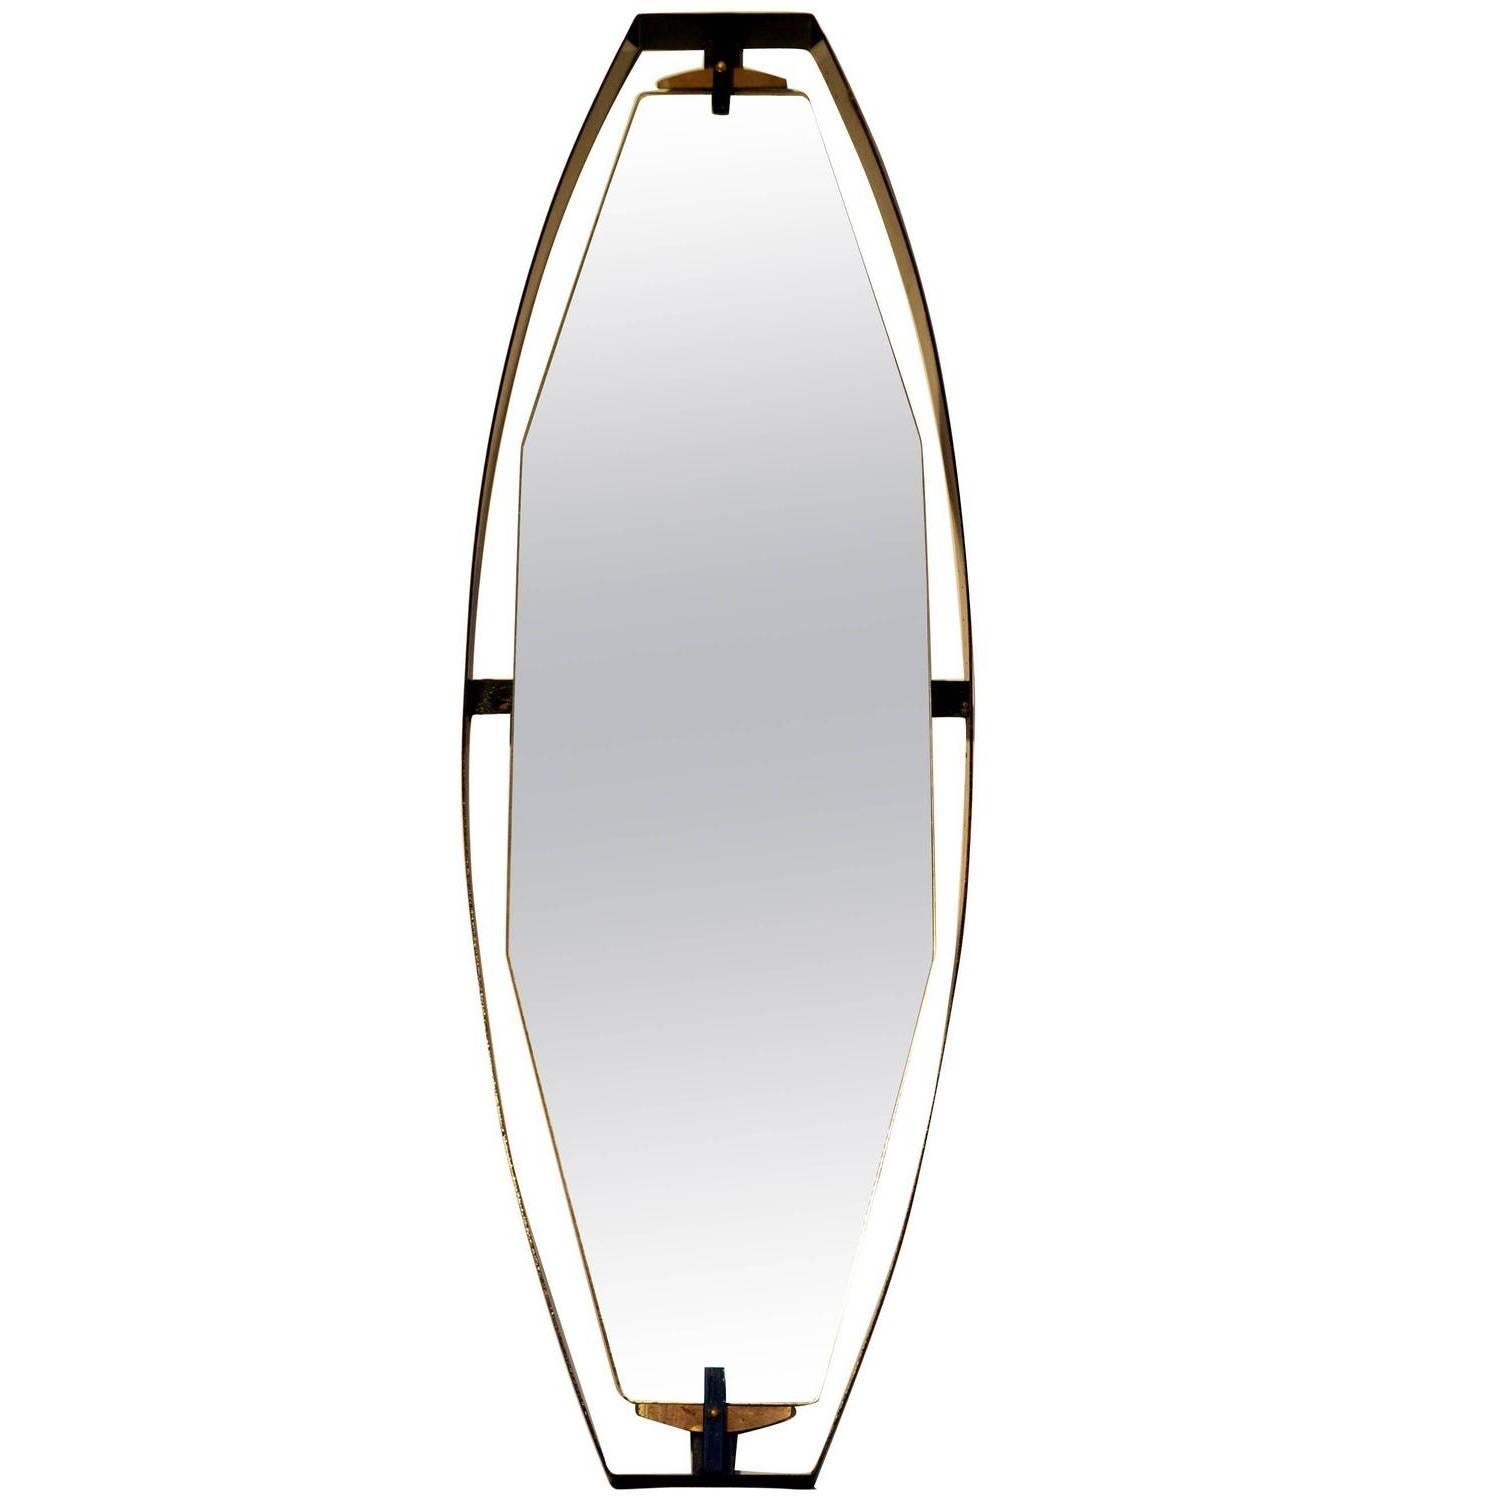 Diamond shaped full size mirrors float in a curvaceous black metal frame. The sculptural form is held together by brass and metal fittings details from above and below. The glass is original and marked.
The black border is re-powder coated and in